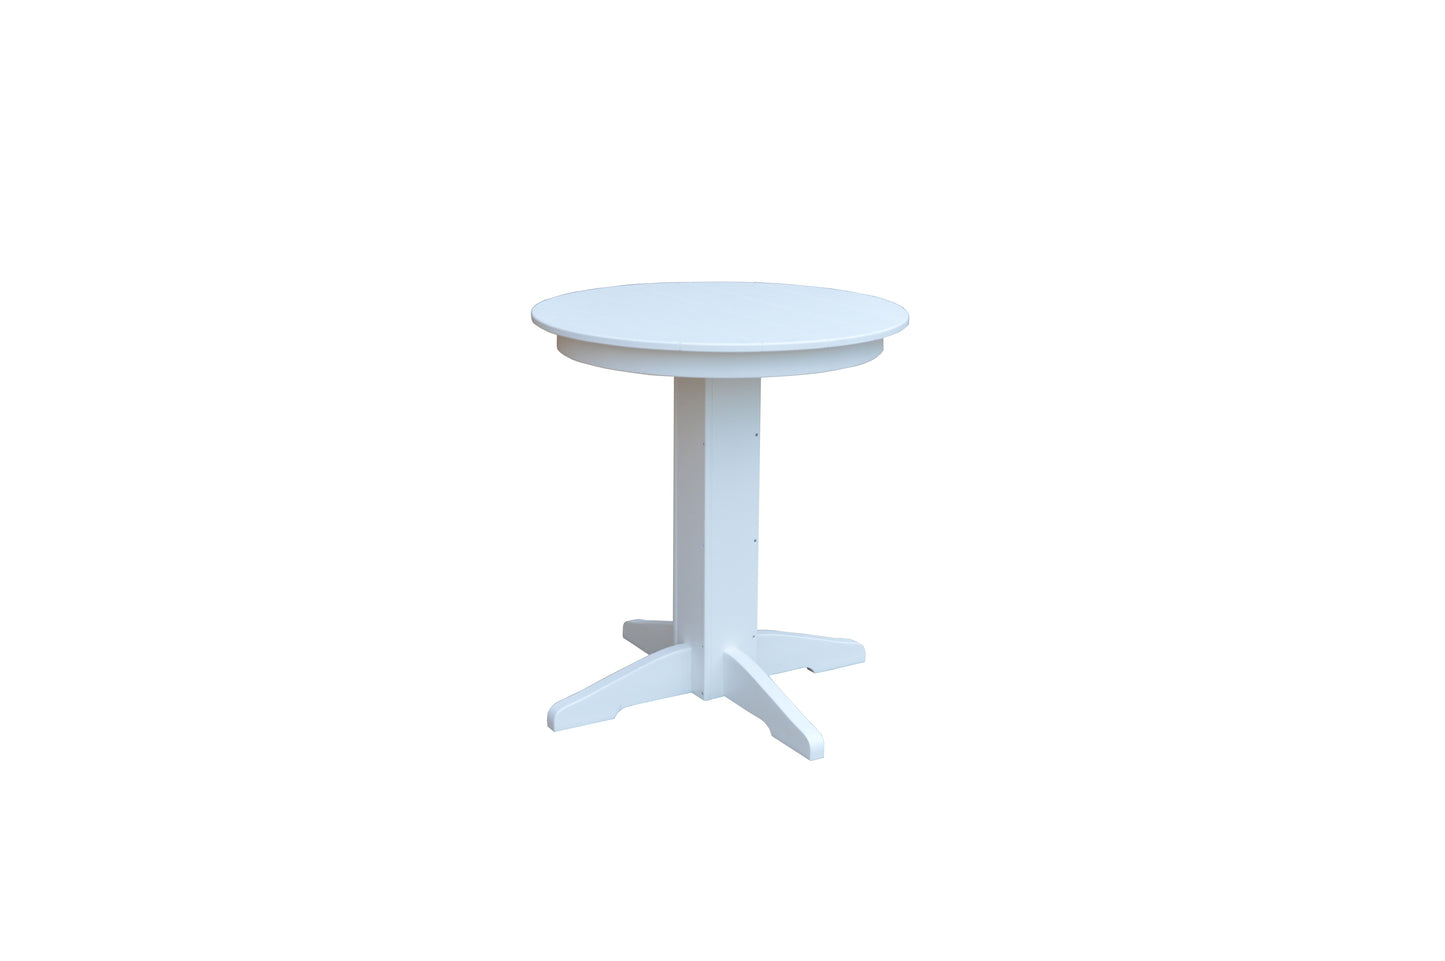 A&L Furniture Co. Recycled Plastic 33" Round Balcony Table (COUNTER HEIGHT) - LEAD TIME TO SHIP 10 BUSINESS DAYS